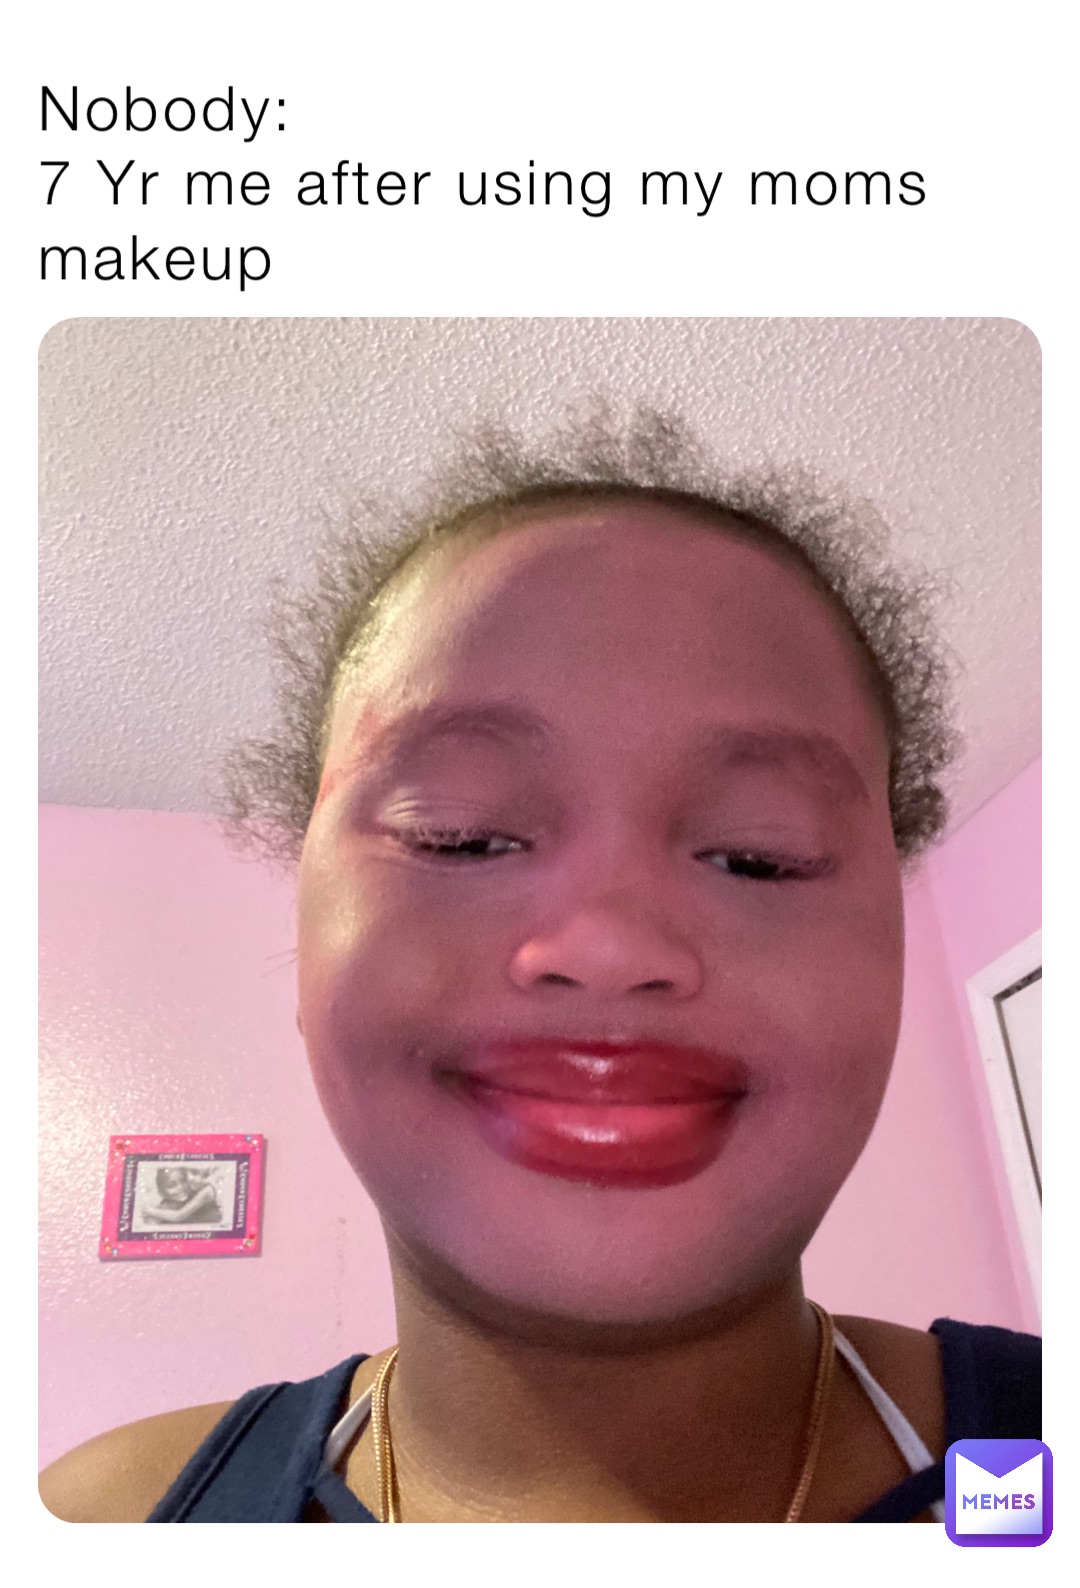 Nobody:
7 Yr me after using my moms makeup